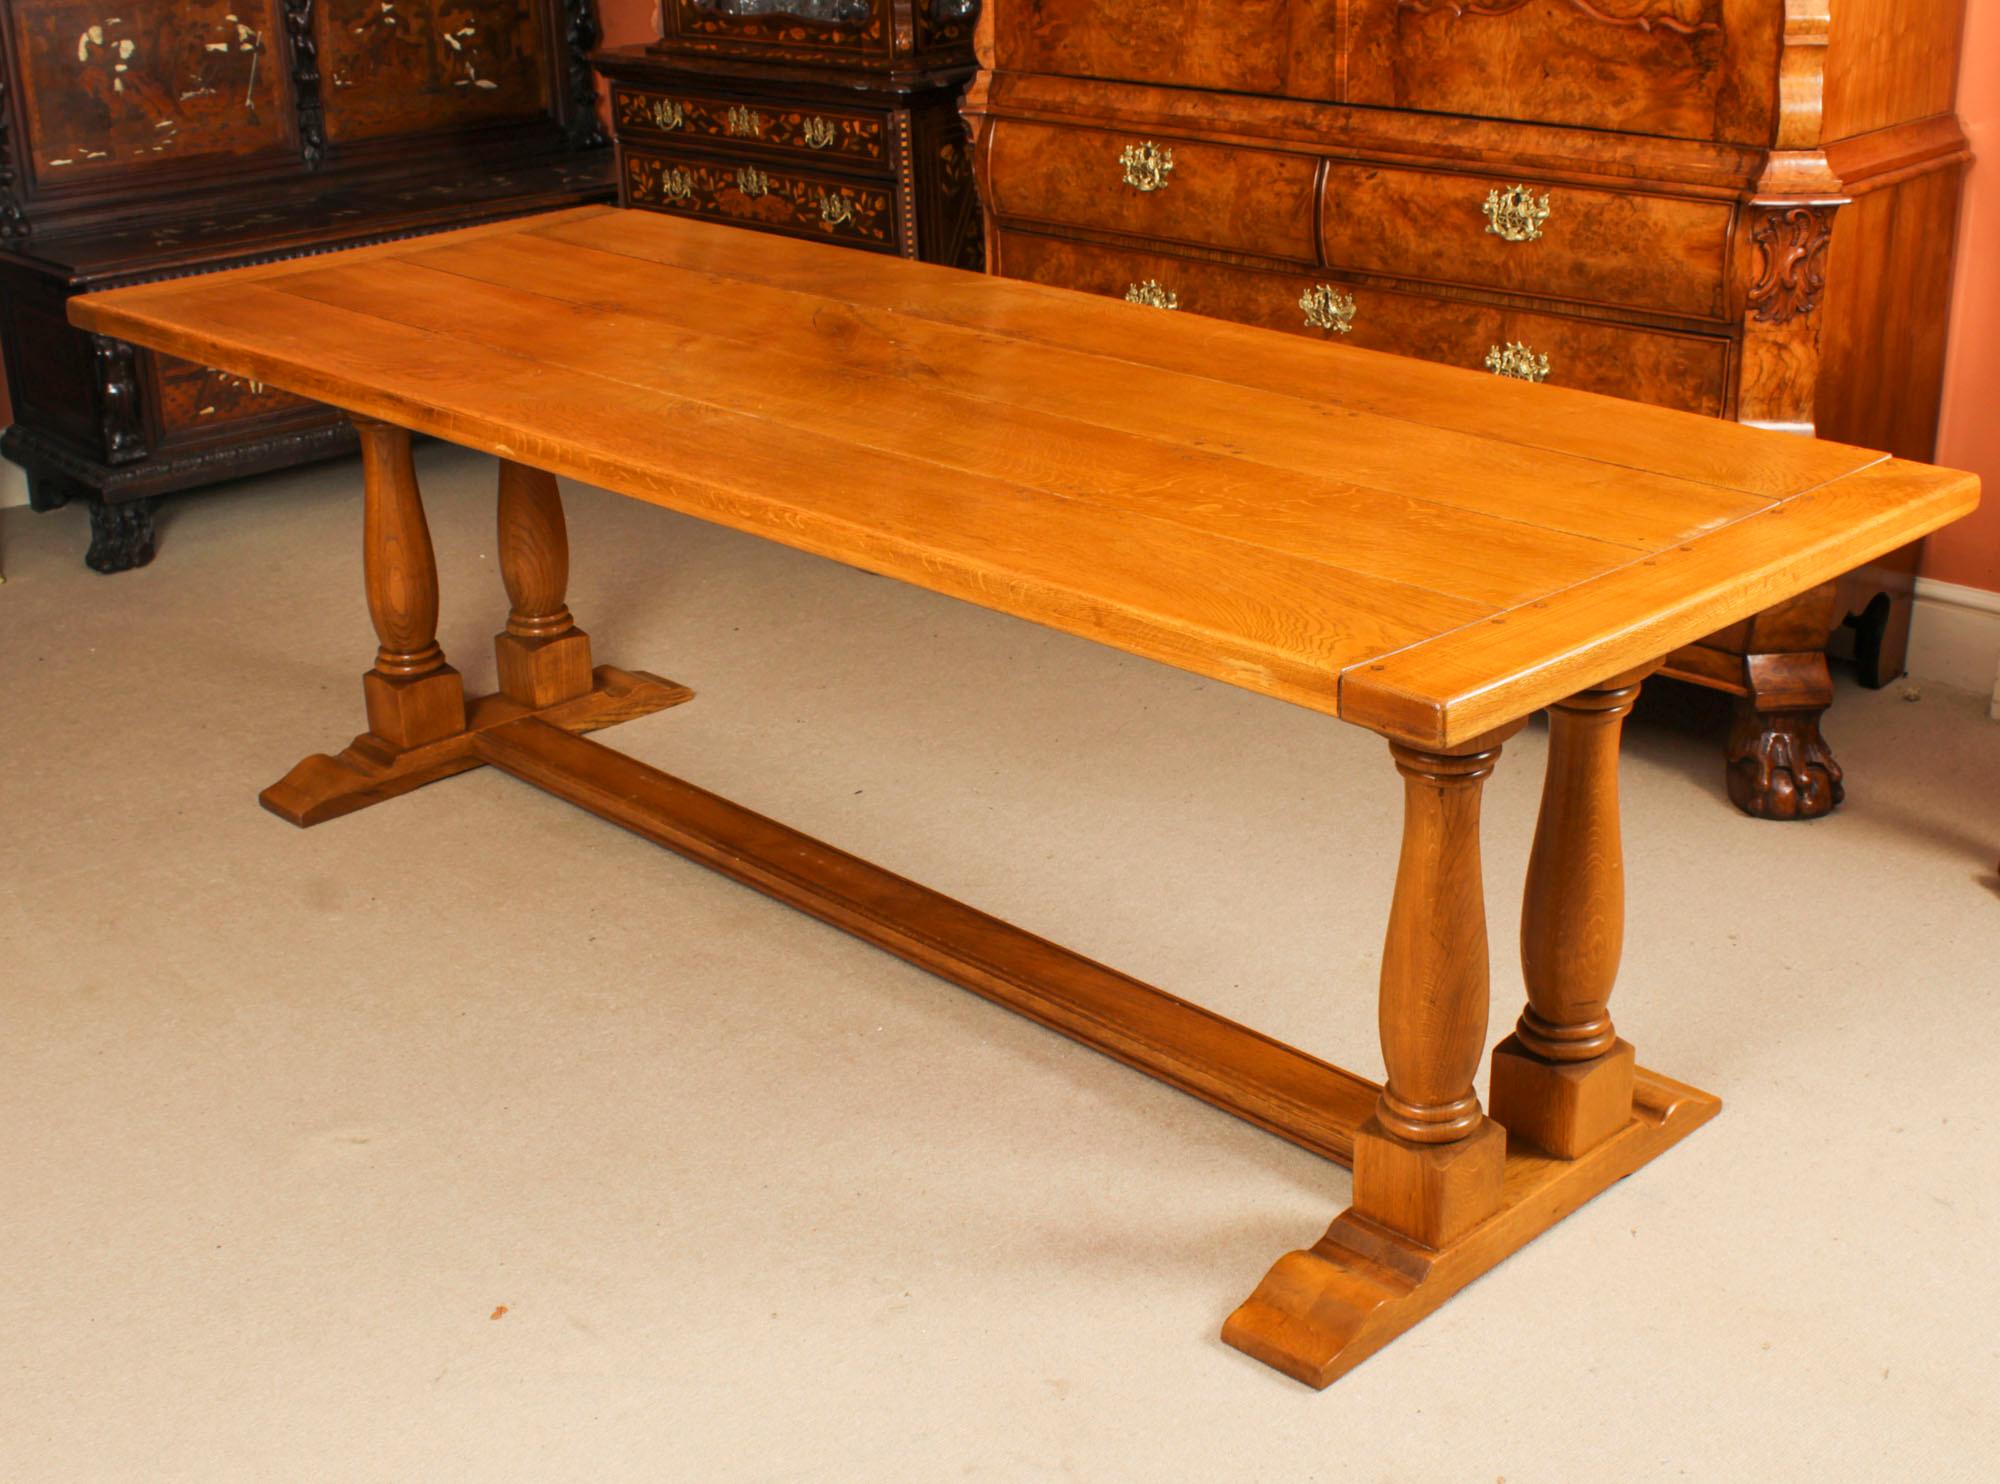 20th Century Vintage solid oak Refectory Dining Table, 8 Chairs and Sideboard Late 20th C For Sale